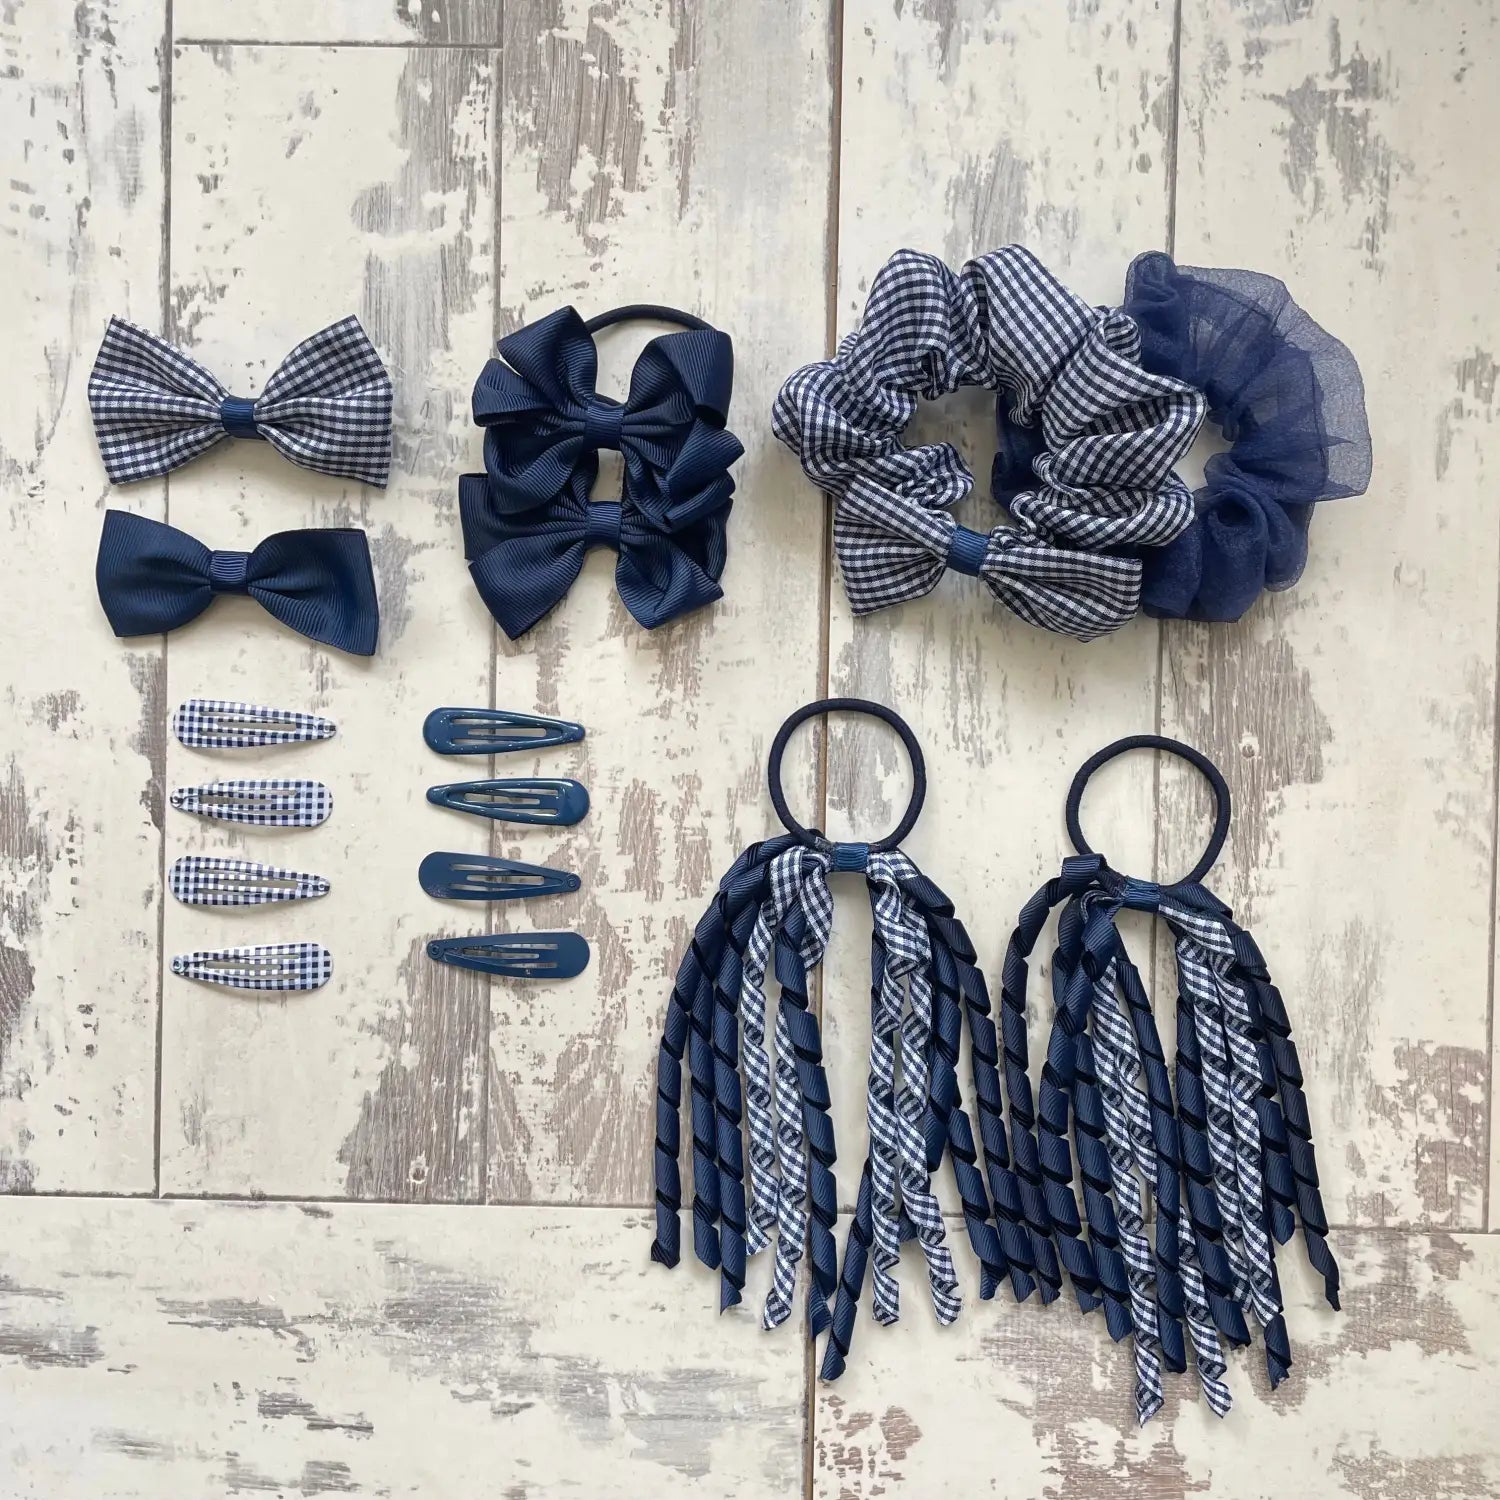 Navy gingham bow hair clips in 16PCS Gingham Check School Girl Hair Accessories Set.